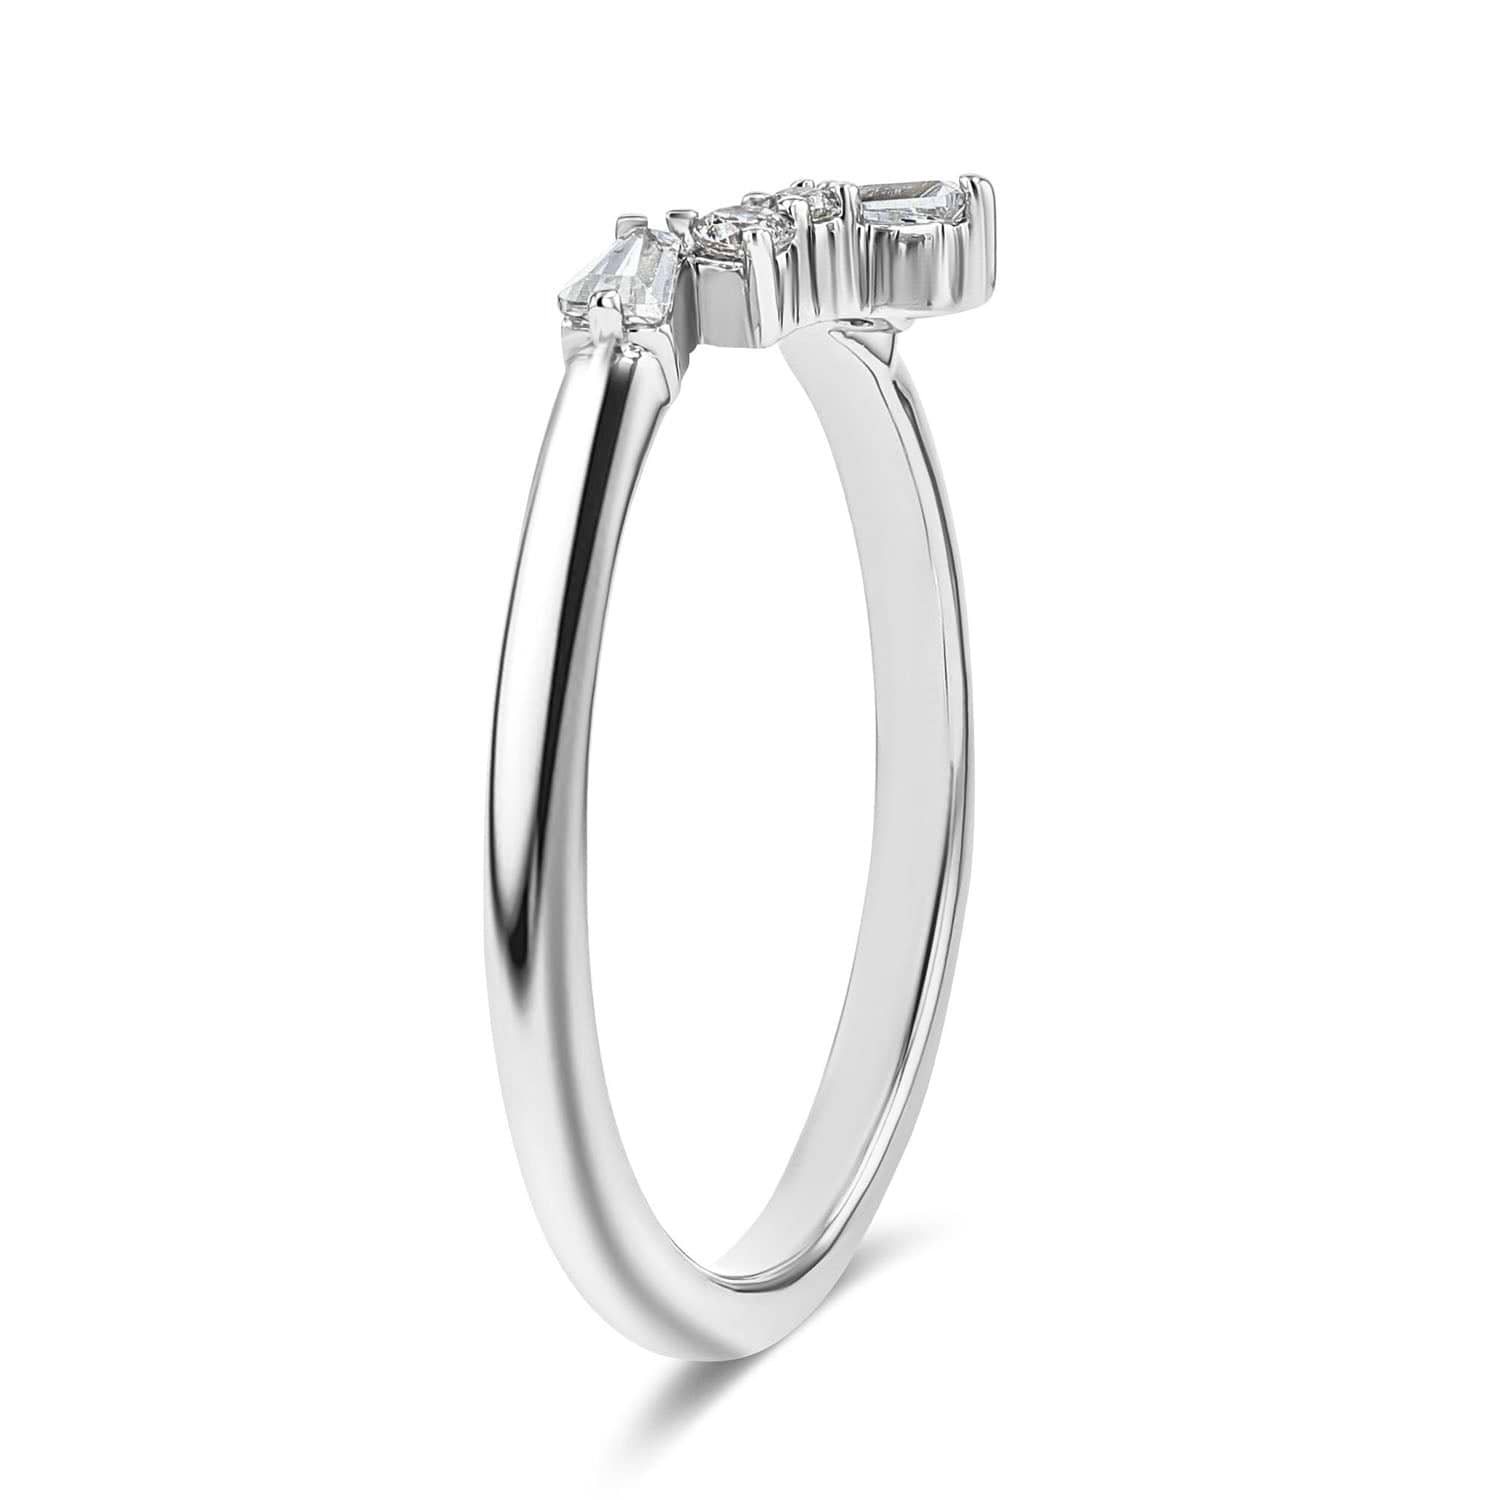 Sunset Accented Wedding Band Shown in 14K White Gold|sunset lab grown diamond accented contour wedding band shown in 14k white gold metal